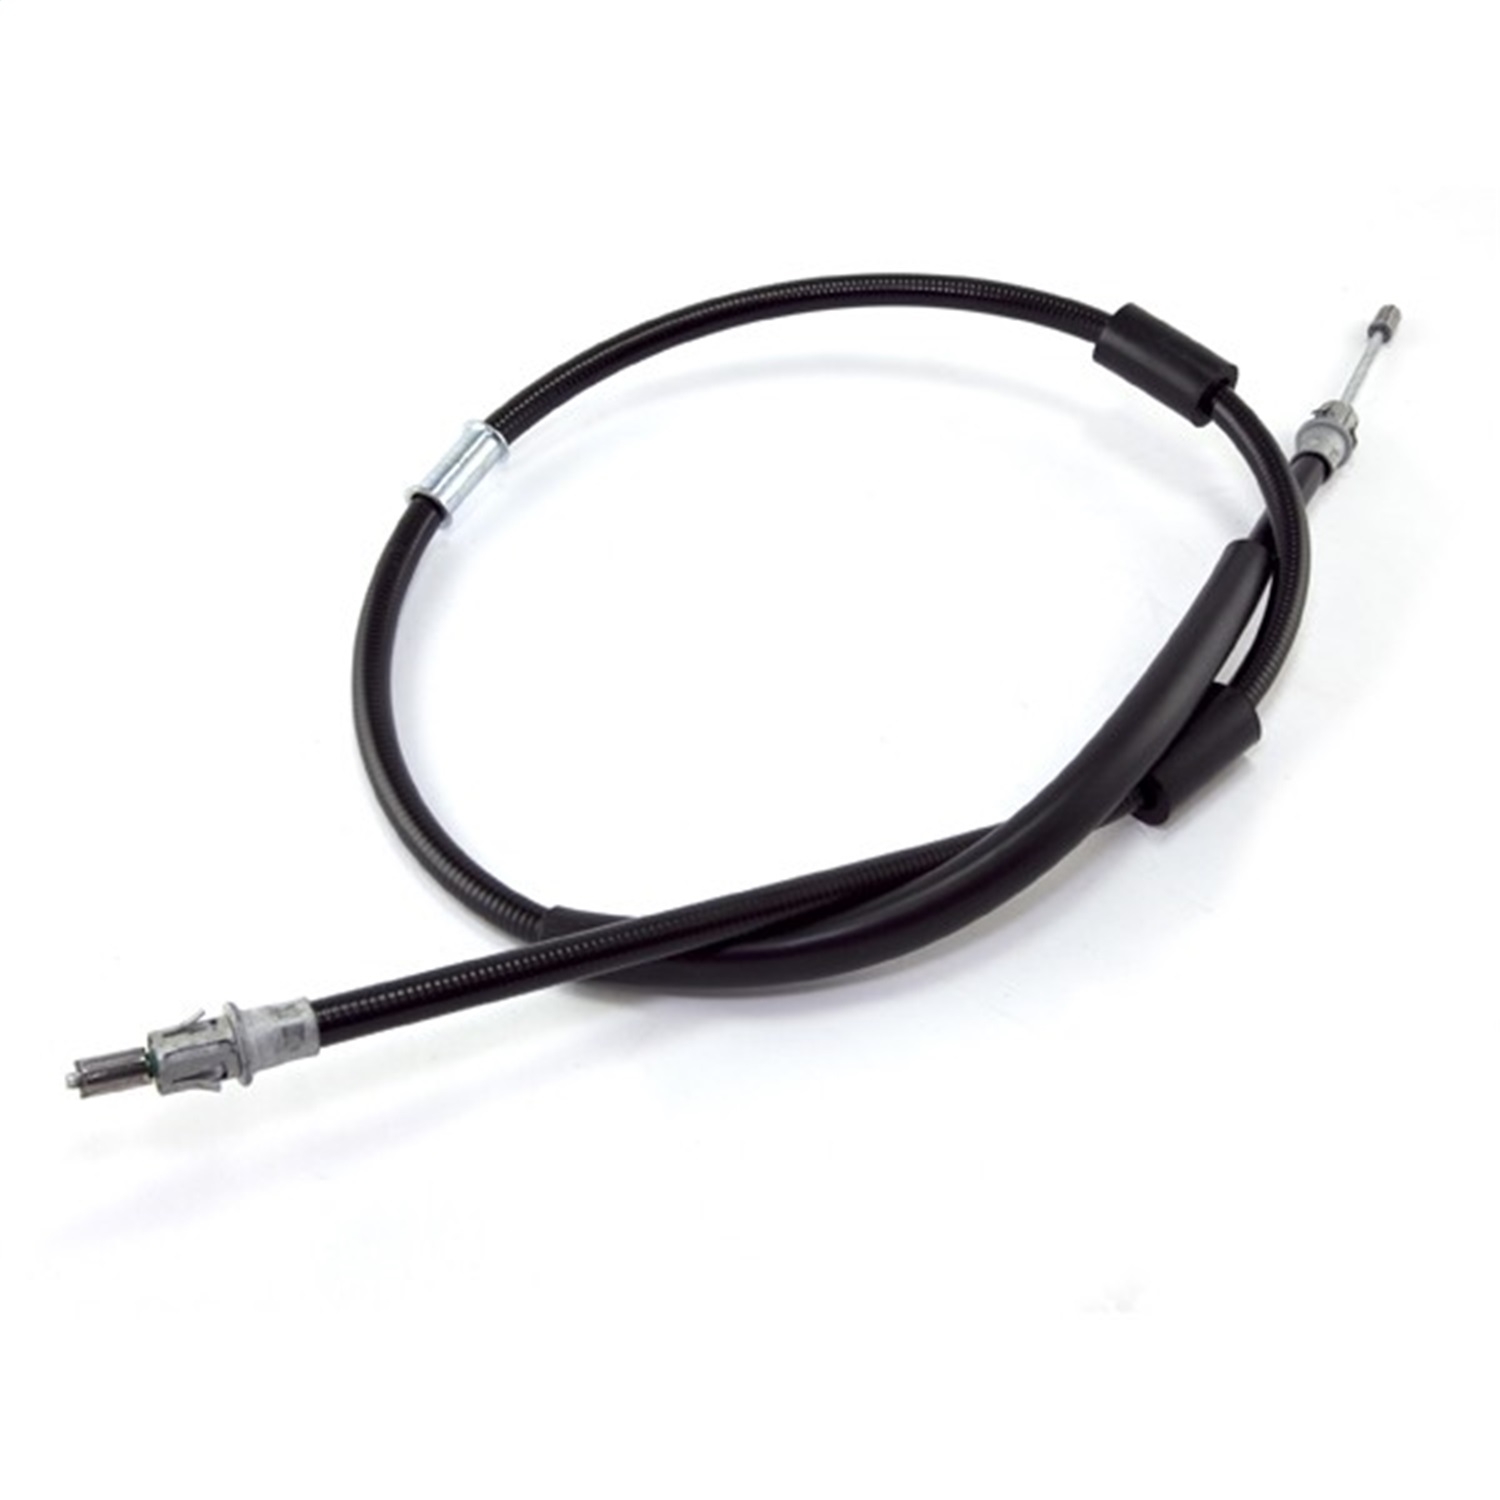 Omix This front parking brake cable from Omix connects the pedal to the  equalizer on 1991-1995 Jeep Wrangler. | Best Prices & Reviews at Morris 4x4